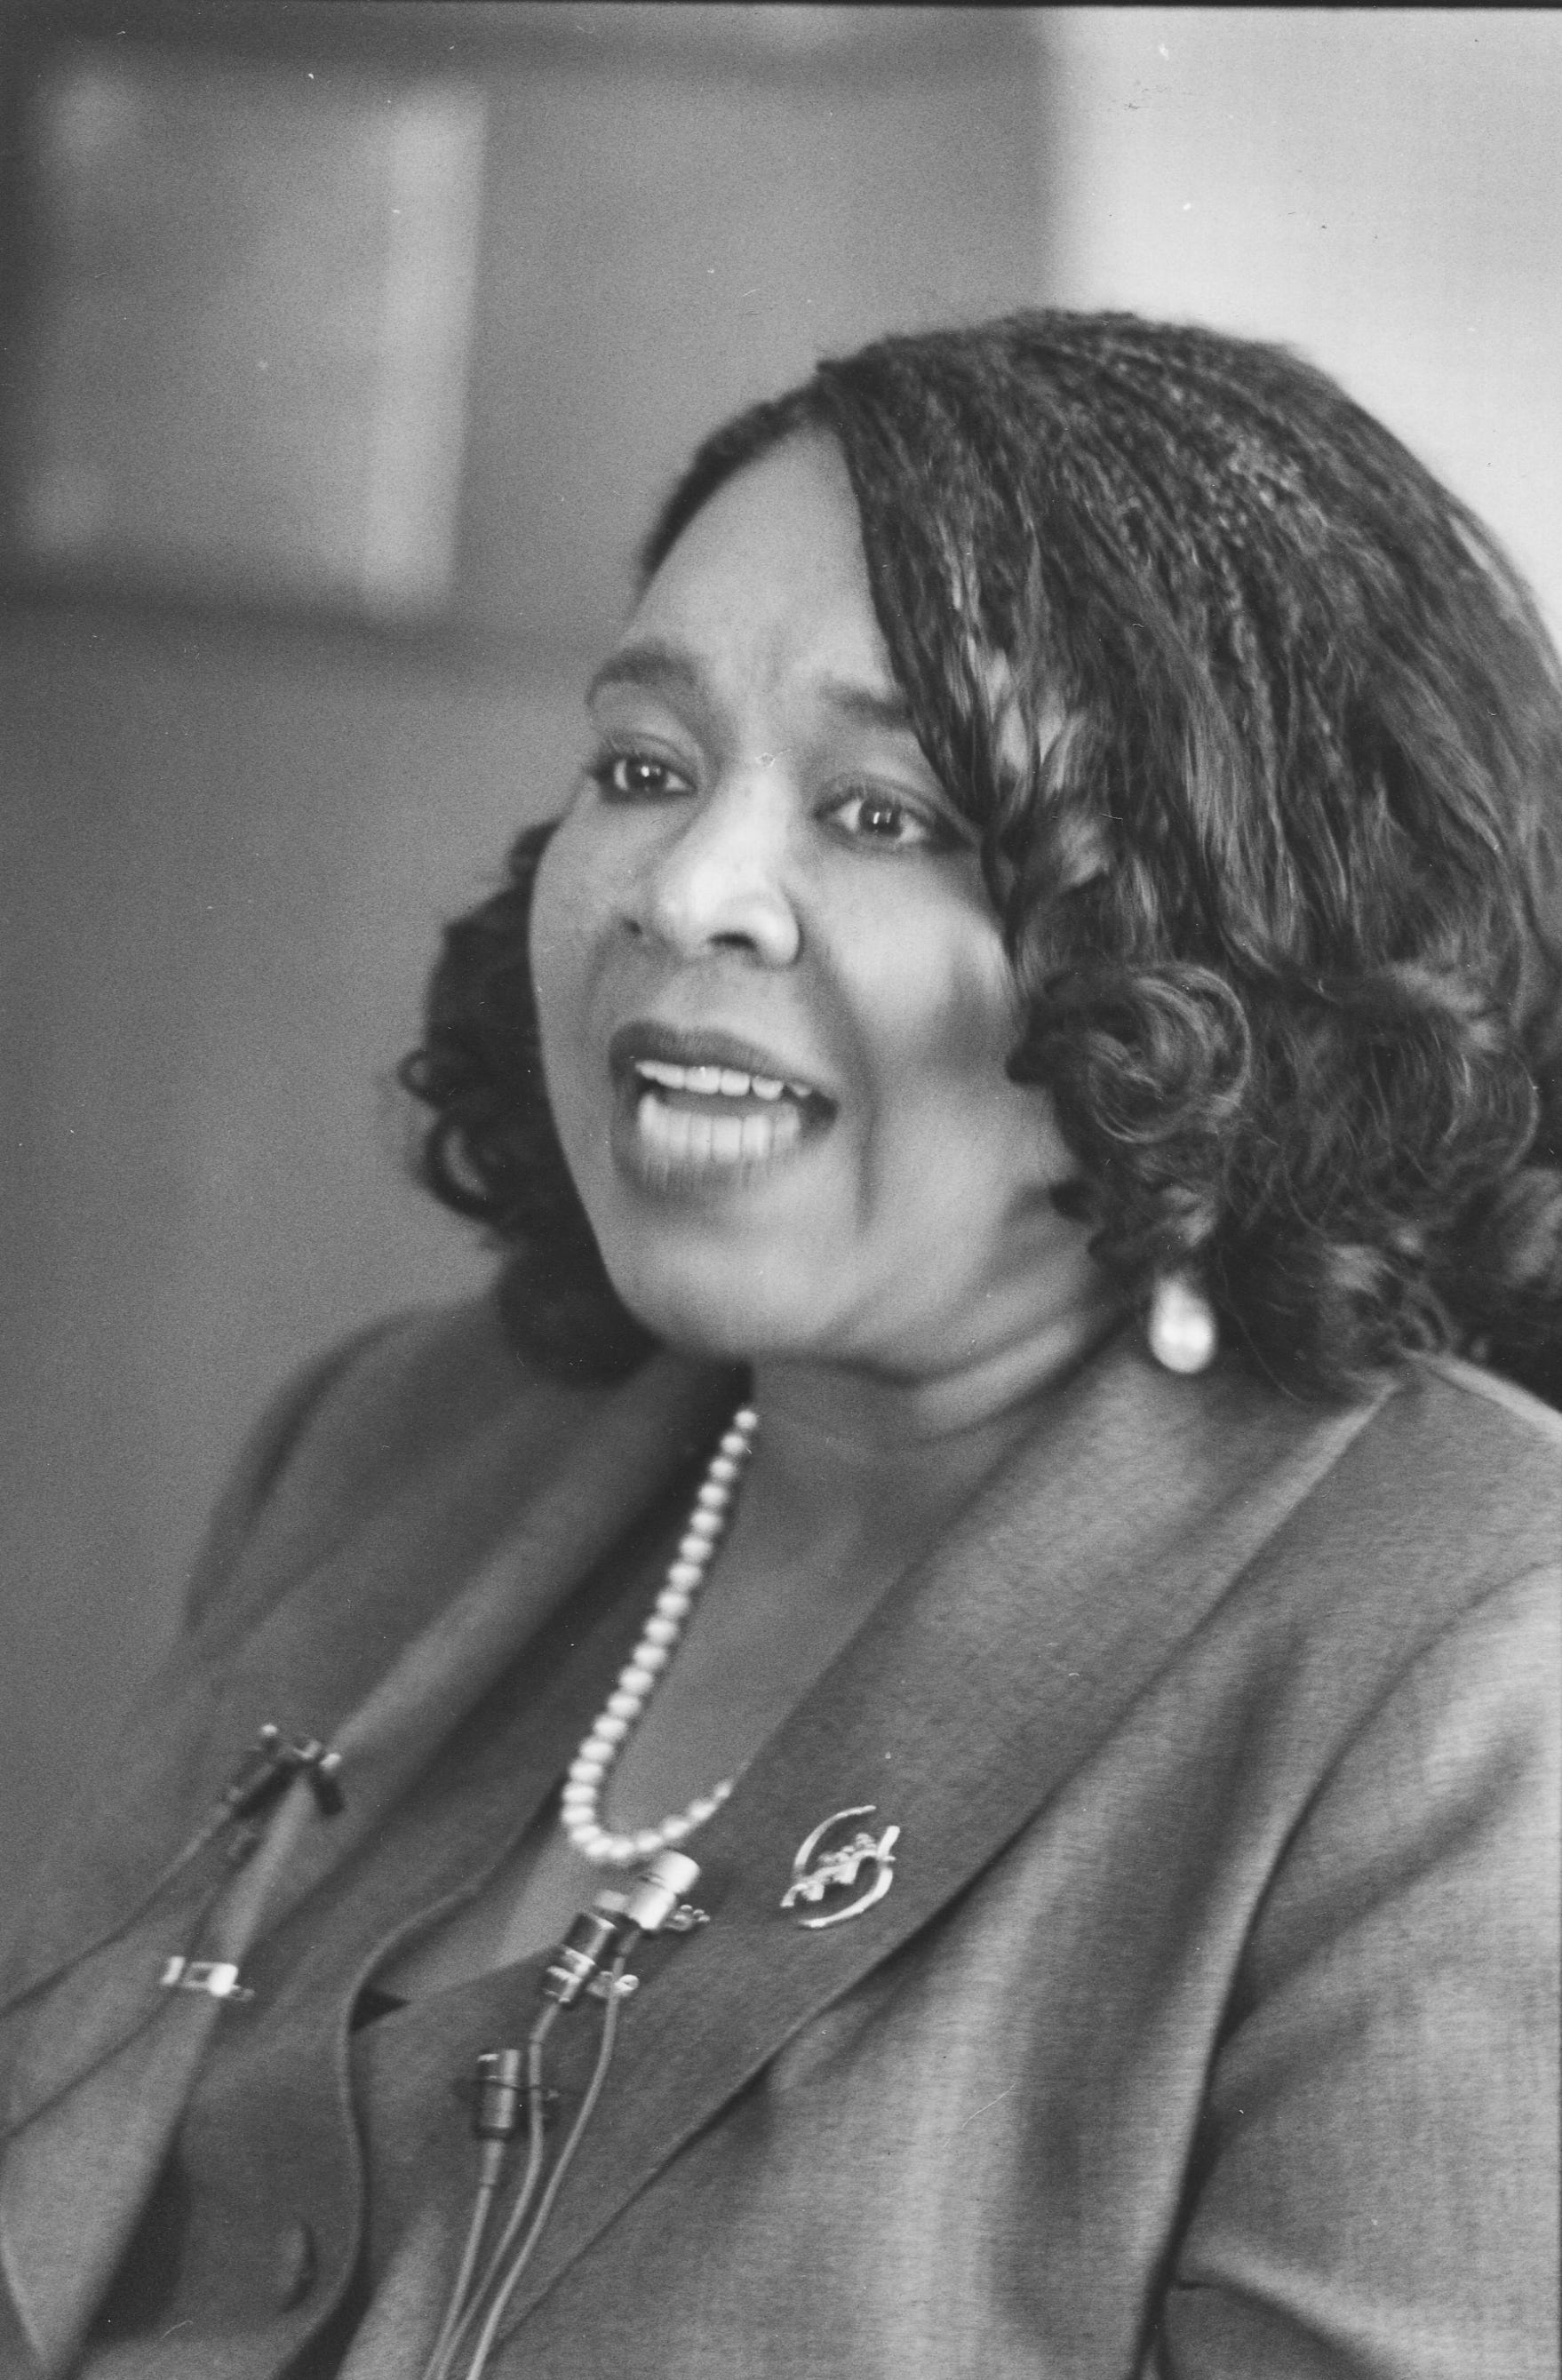 Longtime community activist and Detroit Congresswoman Barbara-Rose Collins, seen here in a May 10, 1989 photo, died at the age of 82, her family announced in a statement on Thursday, Nov. 4, 2021. Collins was elected to the U.S. House in 1990, becoming the first Black woman from Michigan elected to Congress.